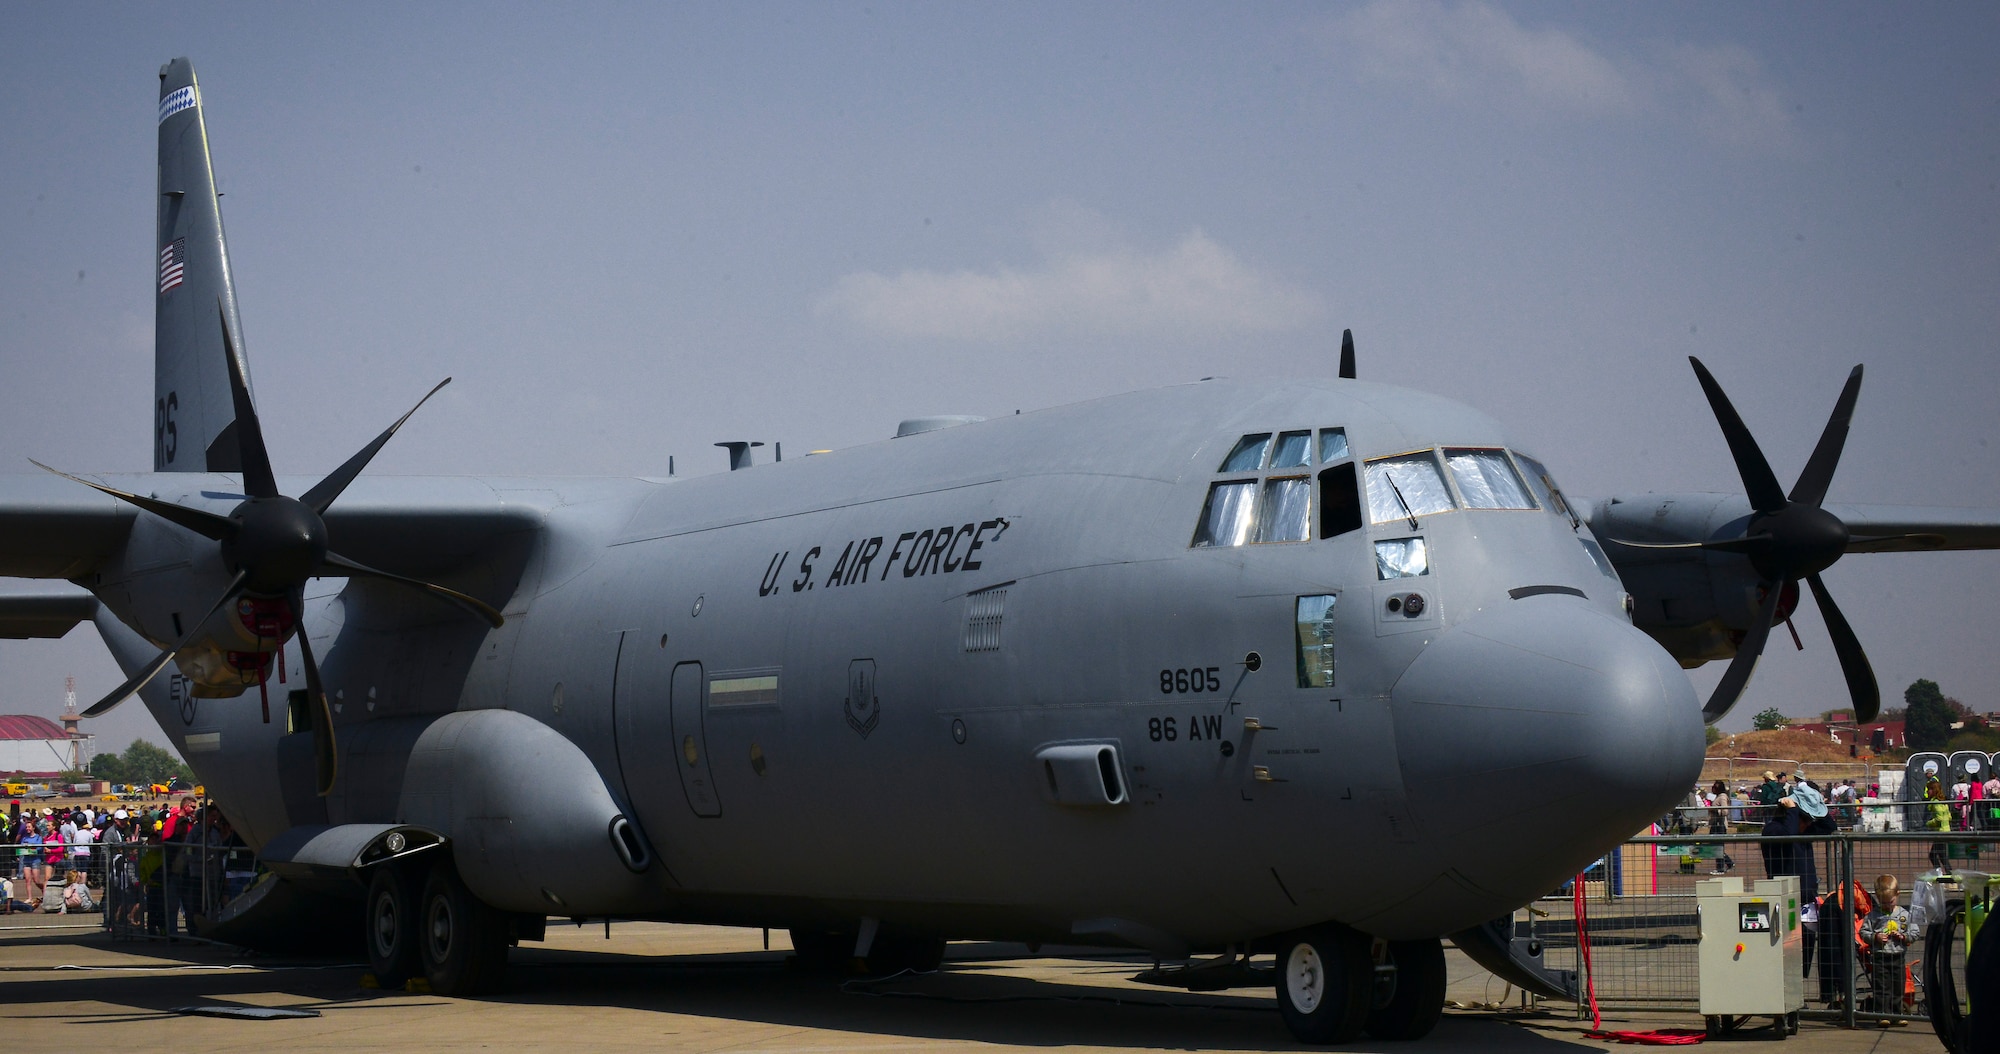 A C-130J Super Hercules sits on a flightline at the Africa Aerospace & Defence Expo at Waterkloof Air Force Base, South Africa, Sept. 20, 2014.  The C-130 was part of a total-force team of Guard, Reserve and active-duty Soldiers and Airmen at the expo. (U.S. Air Force photo/Staff Sgt. Travis Edwards)